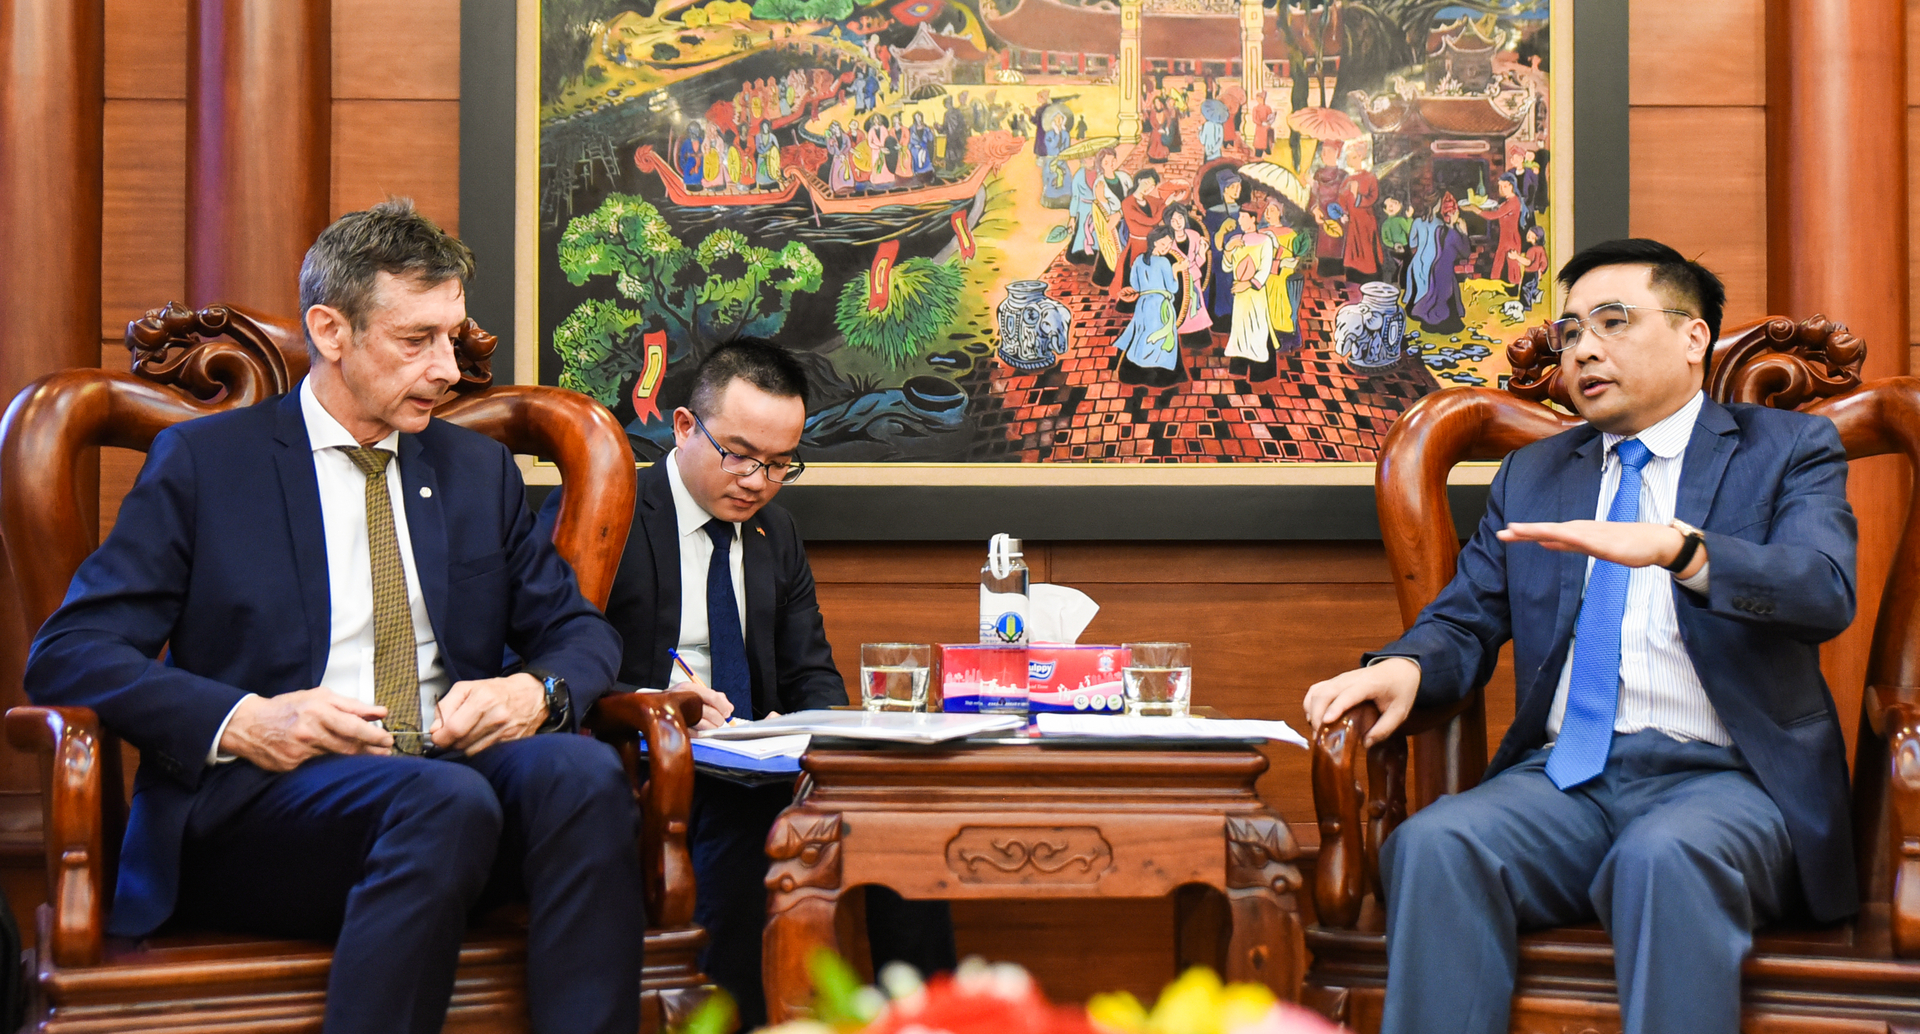 MARD Deputy Minister Nguyen Quoc Tri meets and discusses with Mr. Christoph Hoffmann, Substitute Deputy of the Committee on Economic Cooperation and Development of the German National Assembly. Photo: Pham Huy.